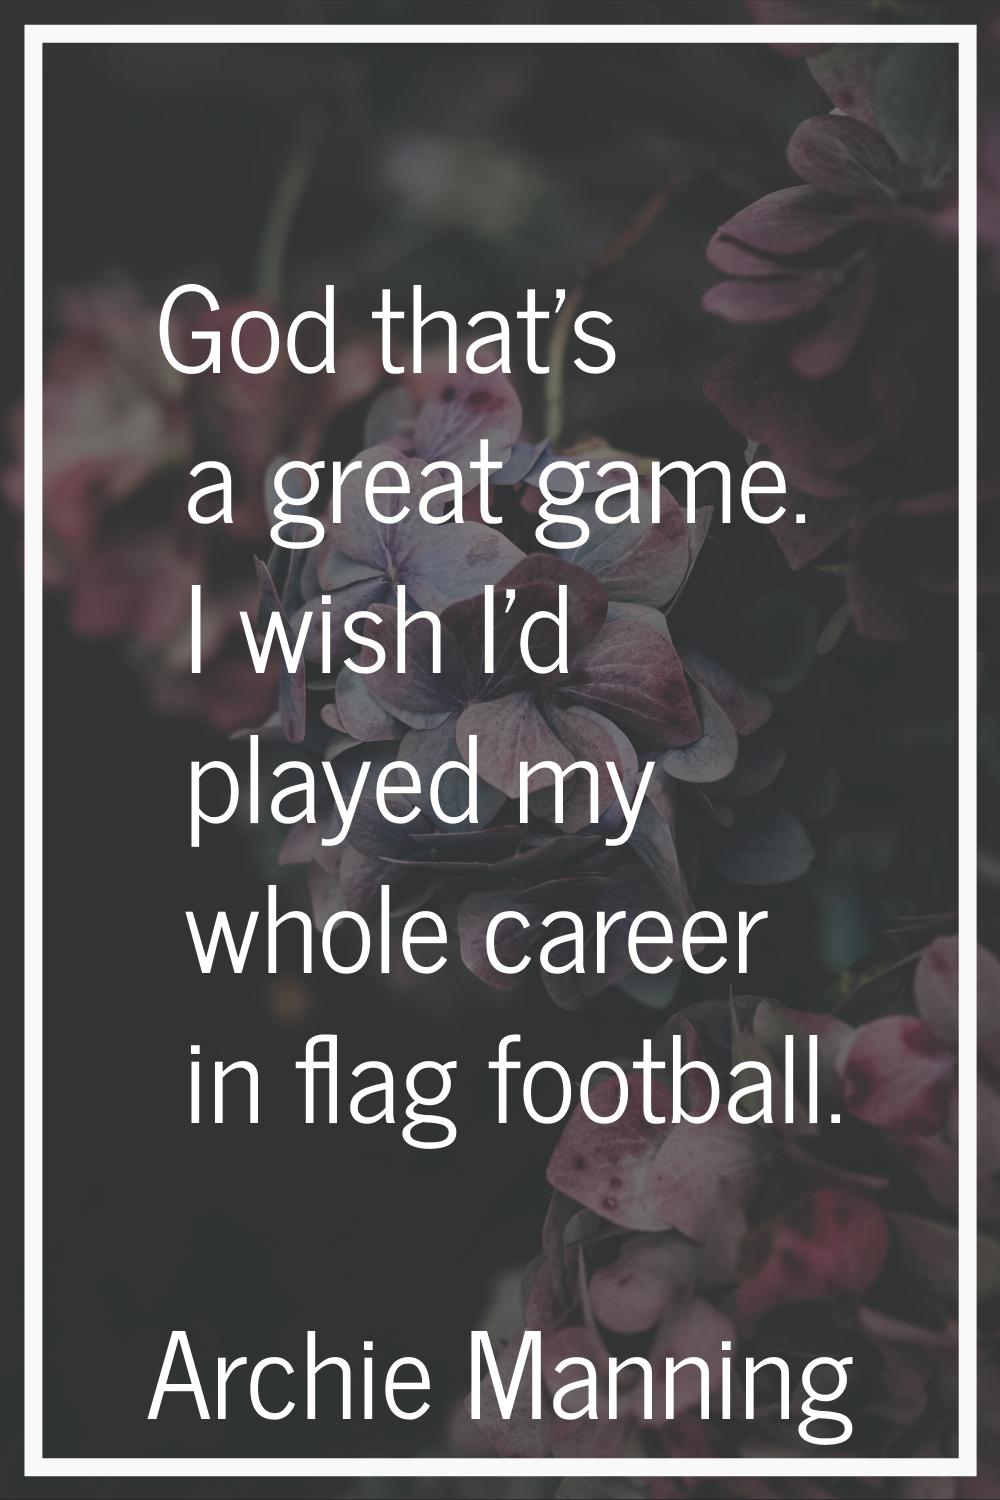 God that's a great game. I wish I'd played my whole career in flag football.